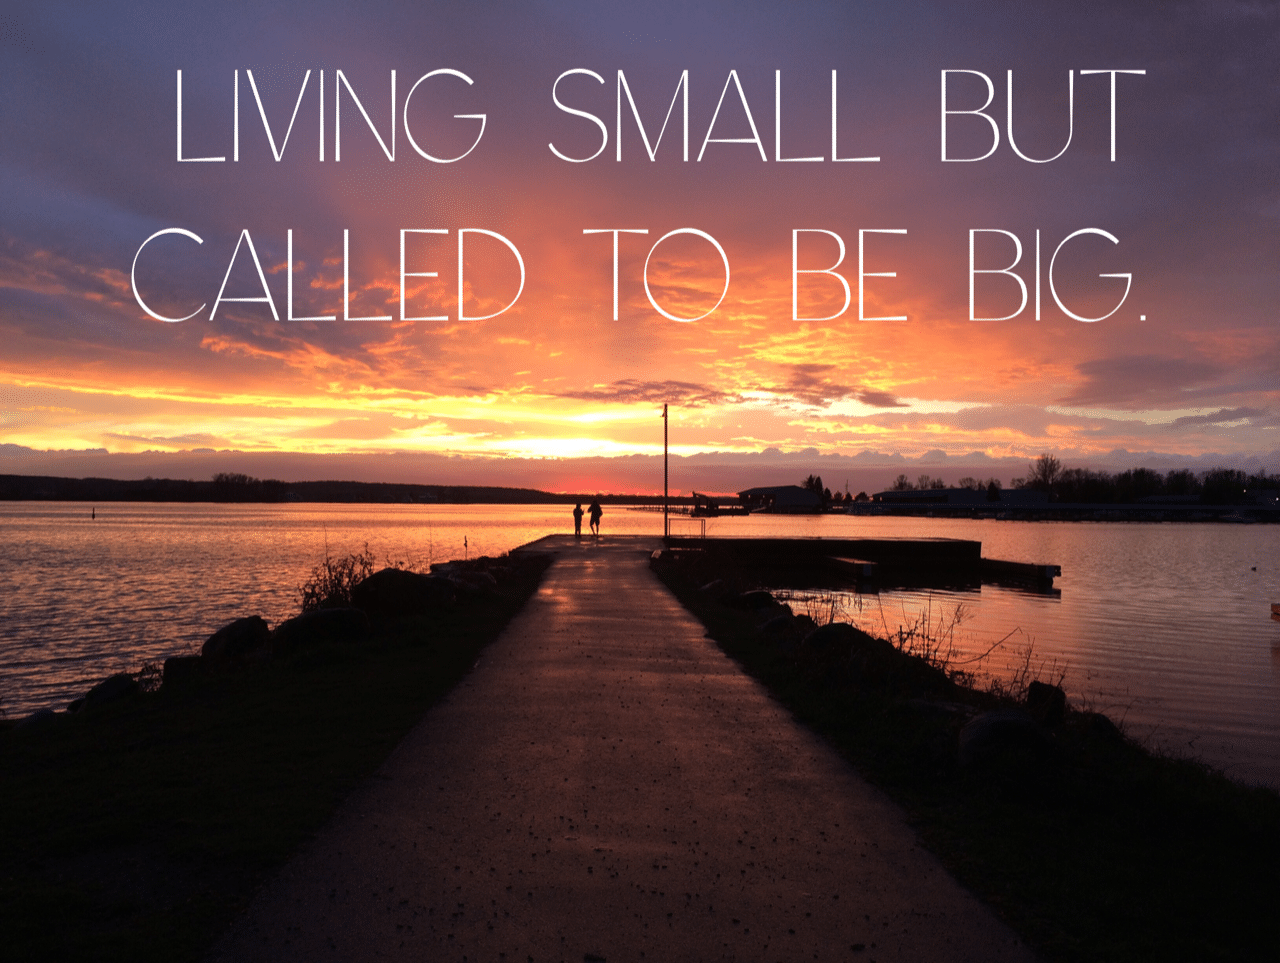 Living small, but called to be Big - by Janice Stone